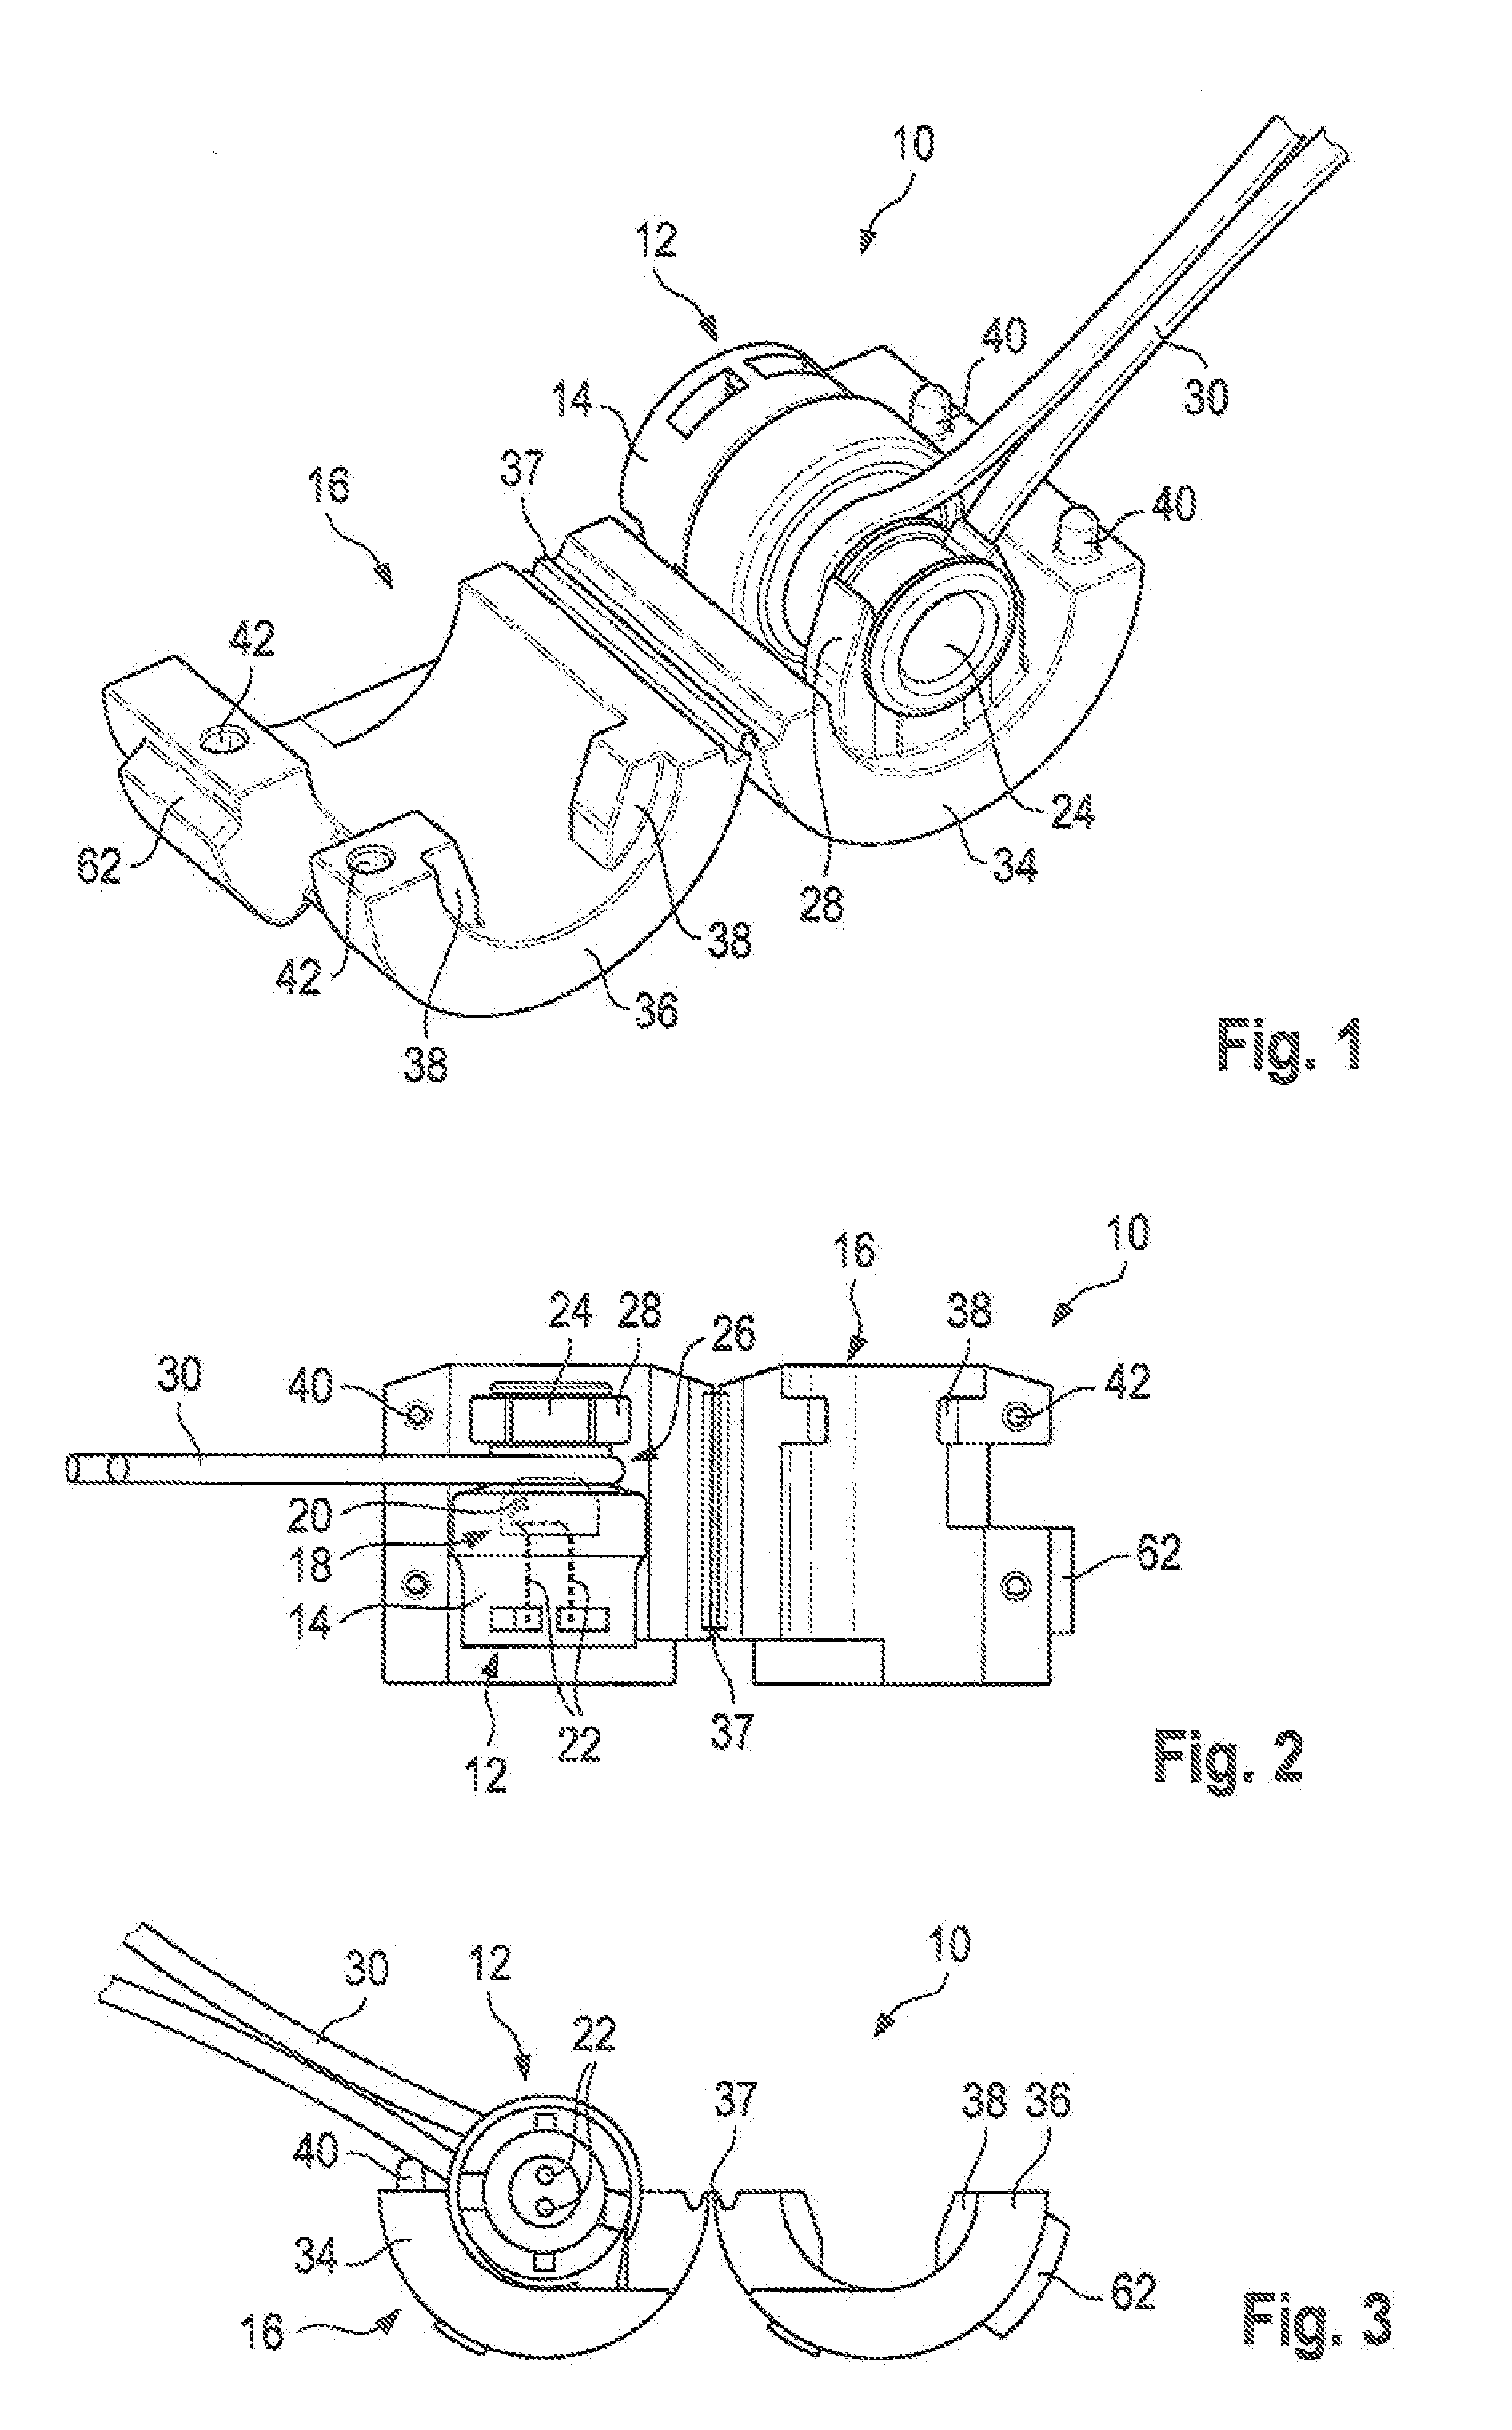 Actuator subassembly